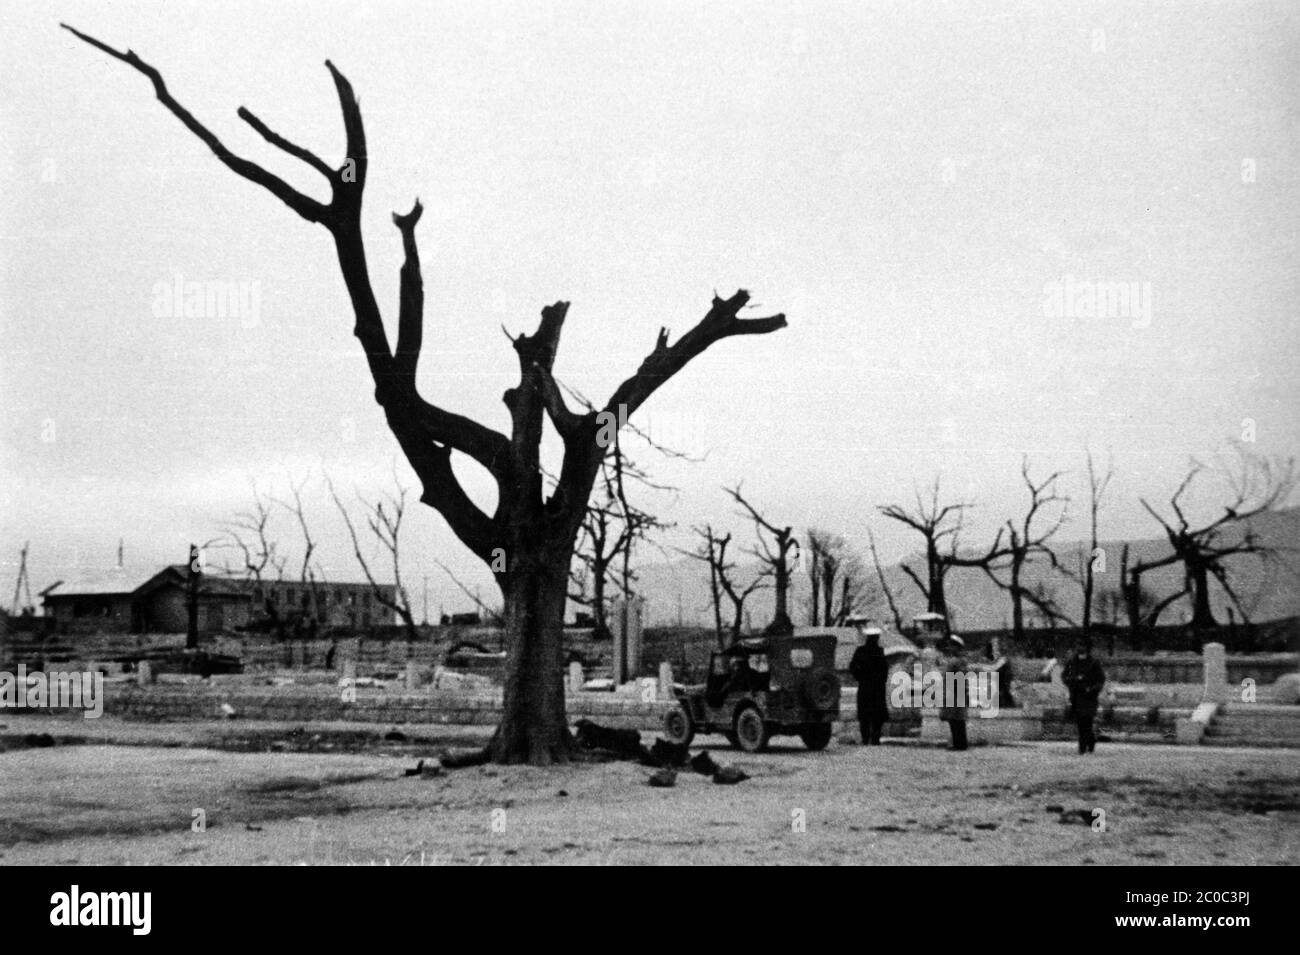 [ 1945 Japan - Atomic Bombing of Hiroshima ] — US military archival photo of the aftermath of the atomic bombing of Hiroshima, ca. 1945 (Showa 20).  Warning: out of focus.  20th century vintage gelatin silver print. Stock Photo